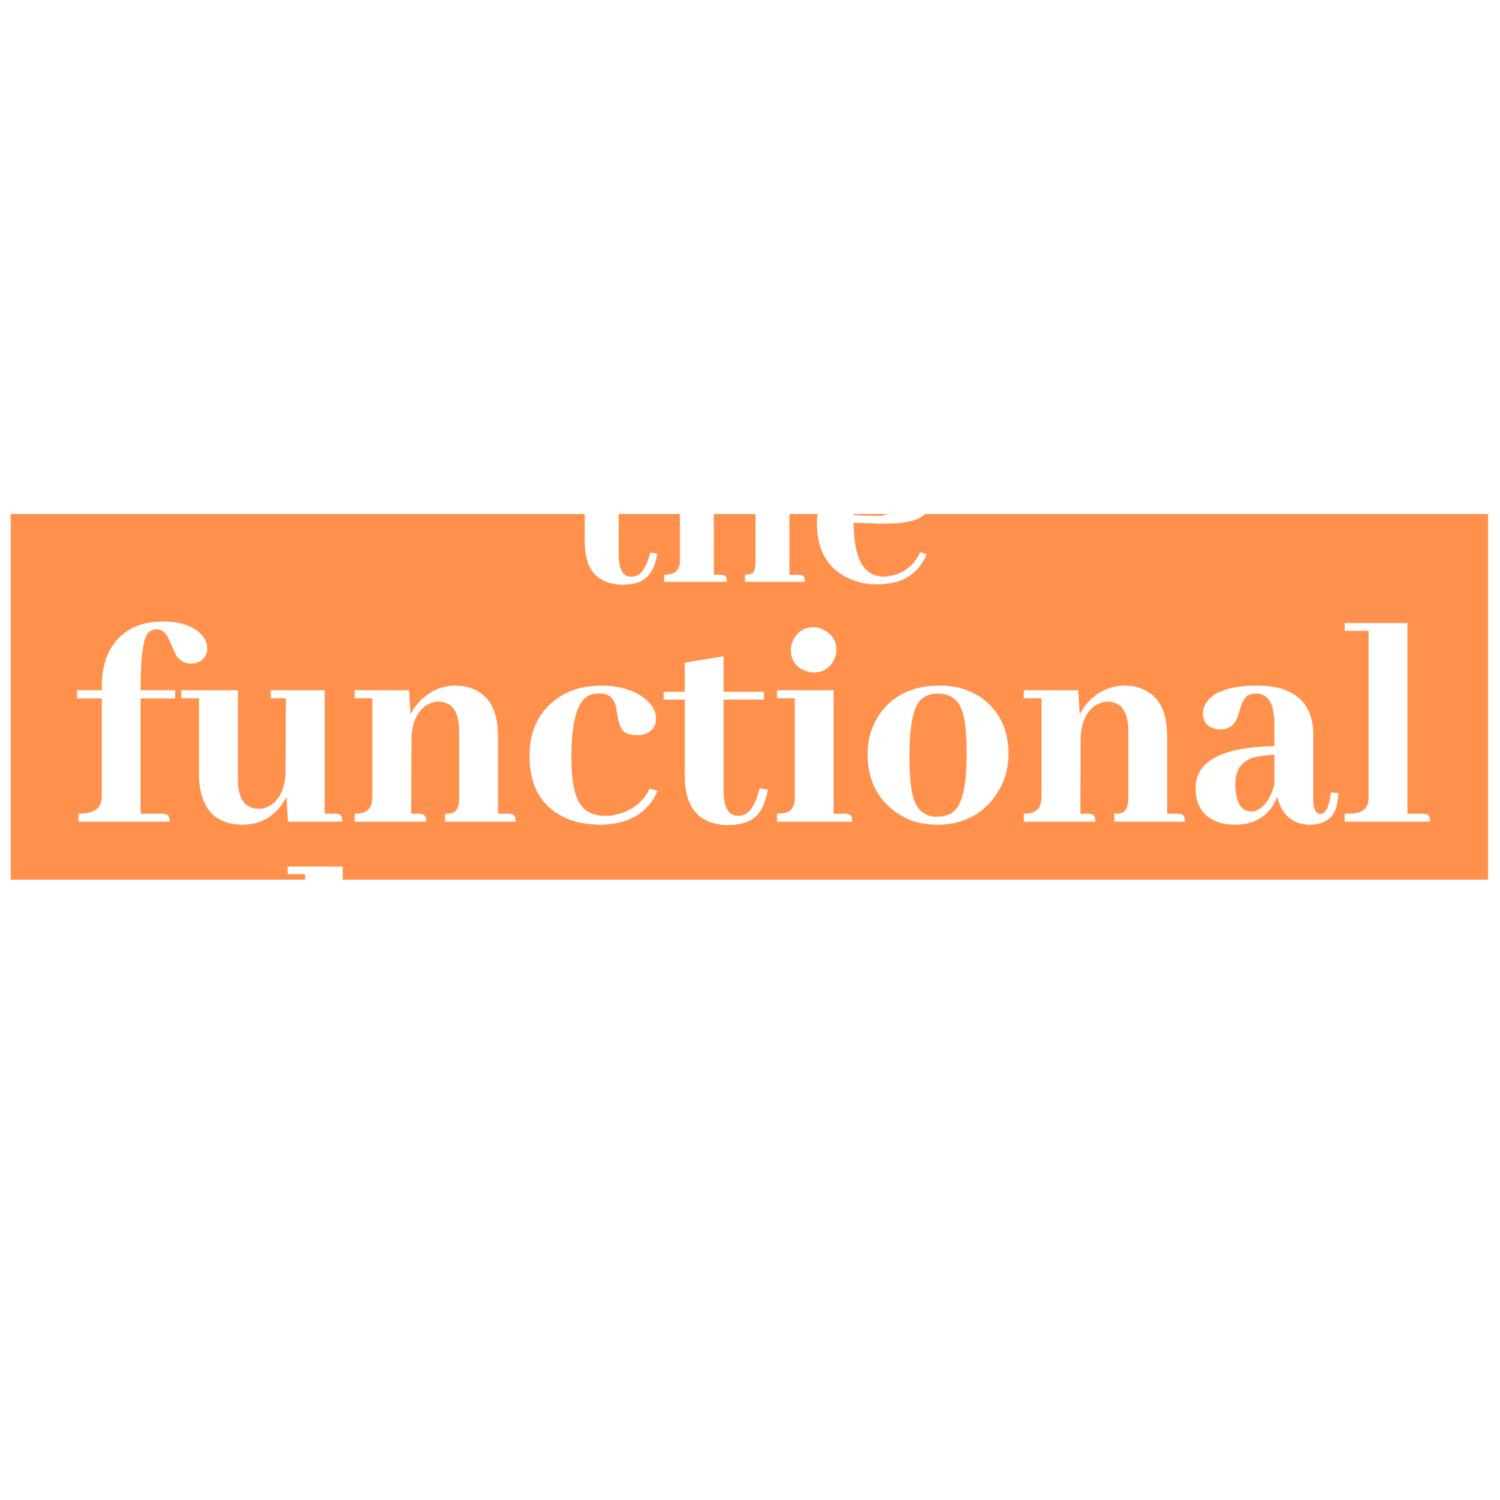 The Functional Man